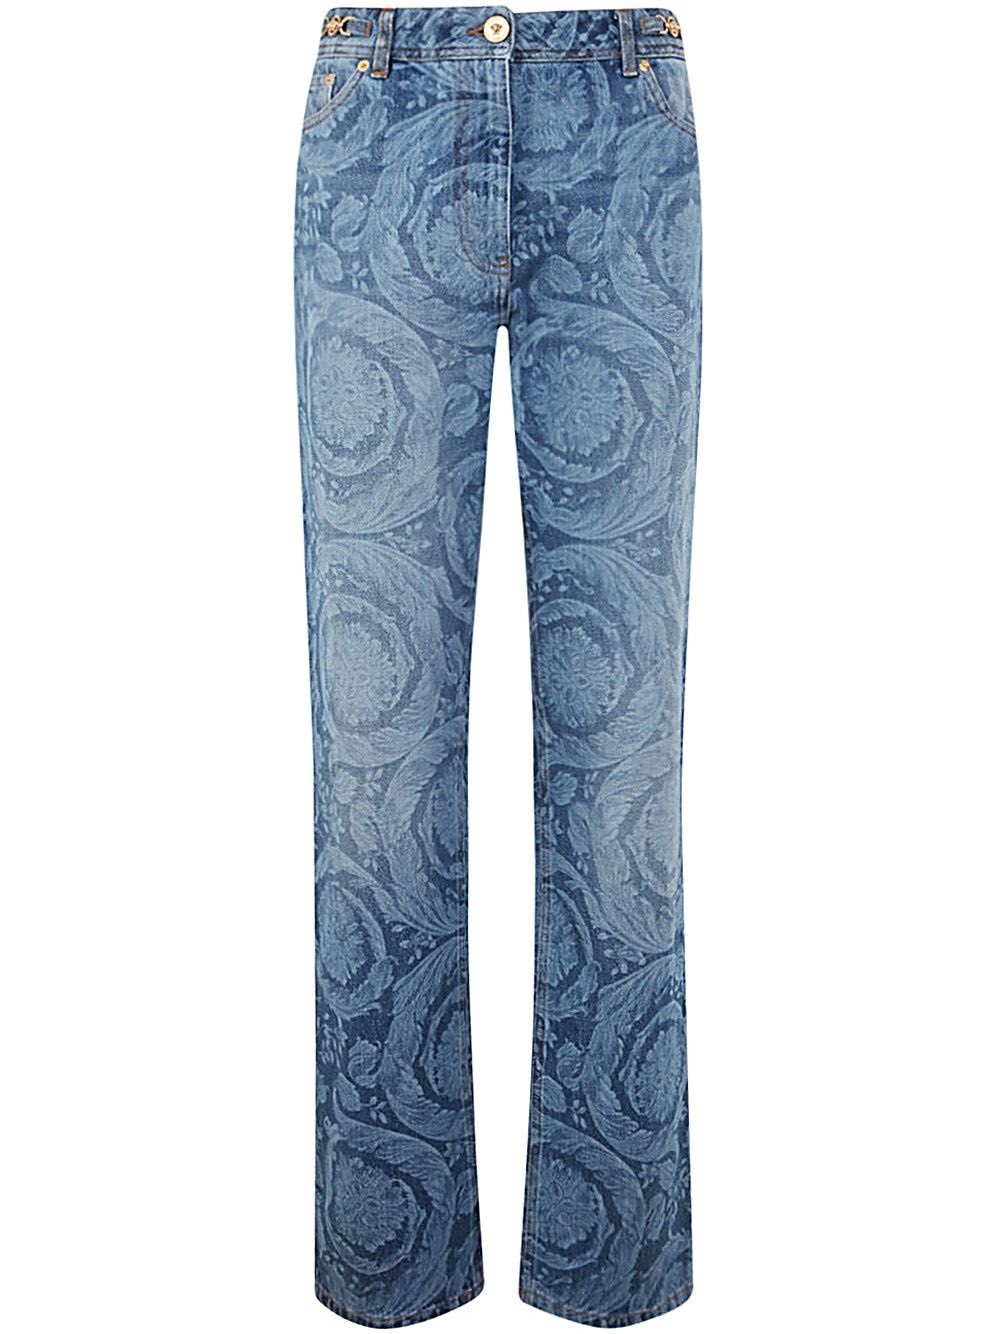 PANT DENIM LASER STONE WASH BAROQUE SERIES DENIM FABRIC WITH SPECIAL TREATMENT - 1